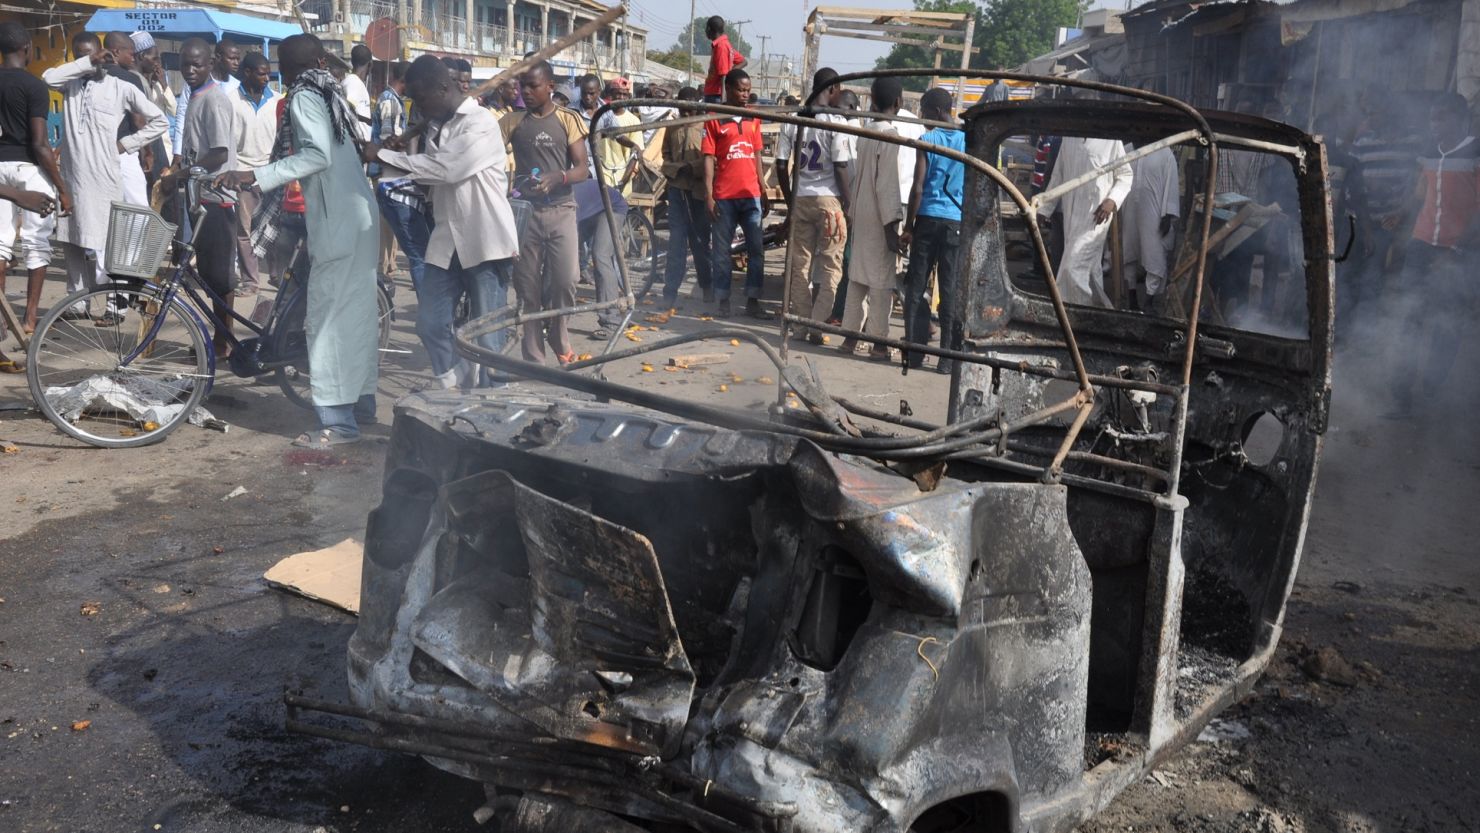 People gather at the scene of a car bomb explosion, at the central market, in Maiduguri, Nigeria on July 1, 2014. 